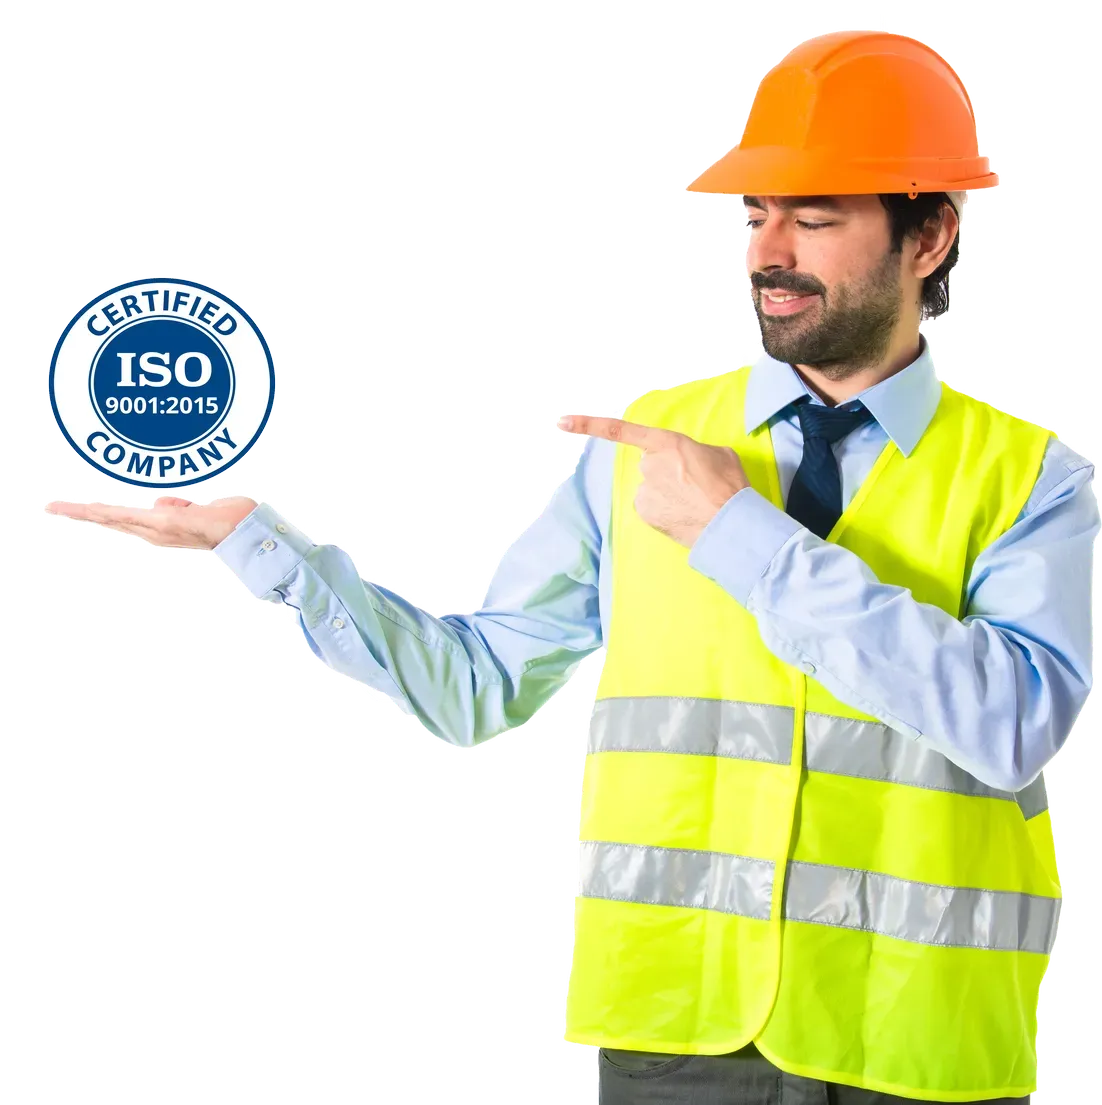 An ISO 9001:2015 Certified Company